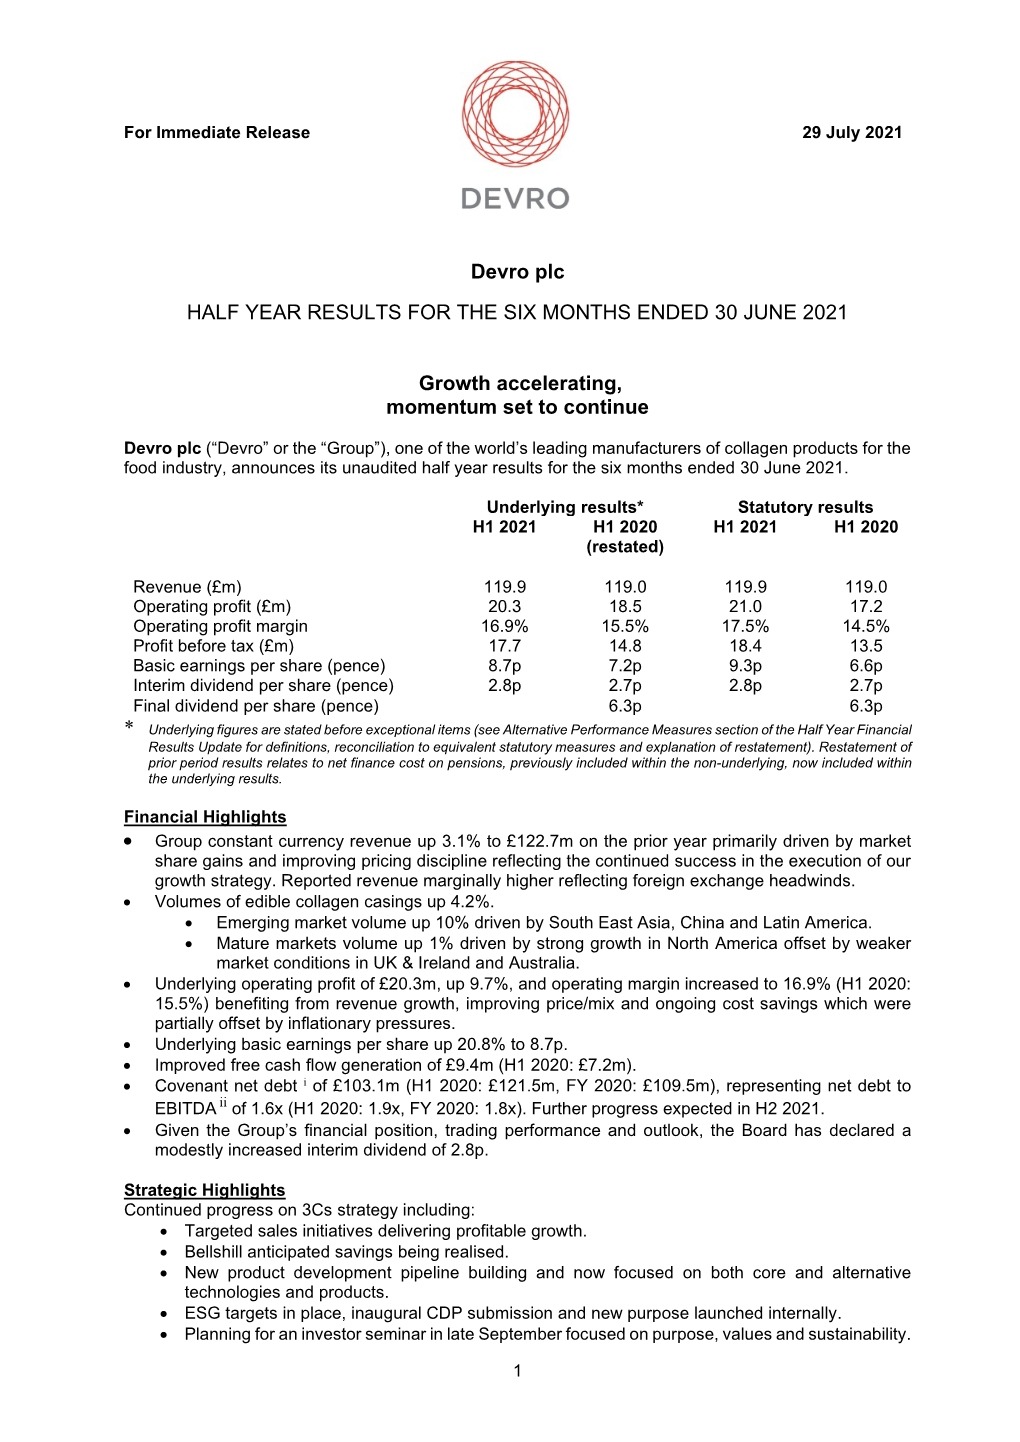 Devro Plc HALF YEAR RESULTS for the SIX MONTHS ENDED 30 JUNE 2021